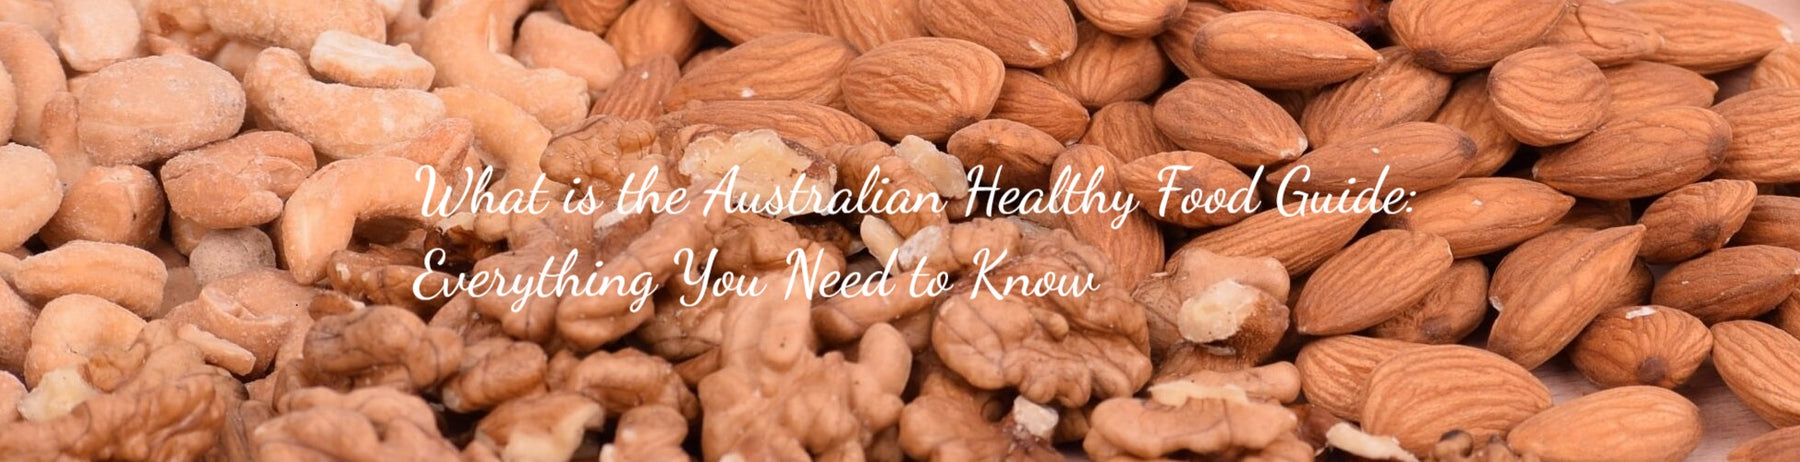 What is the Australian Healthy Food Guide: Everything You Need to Know